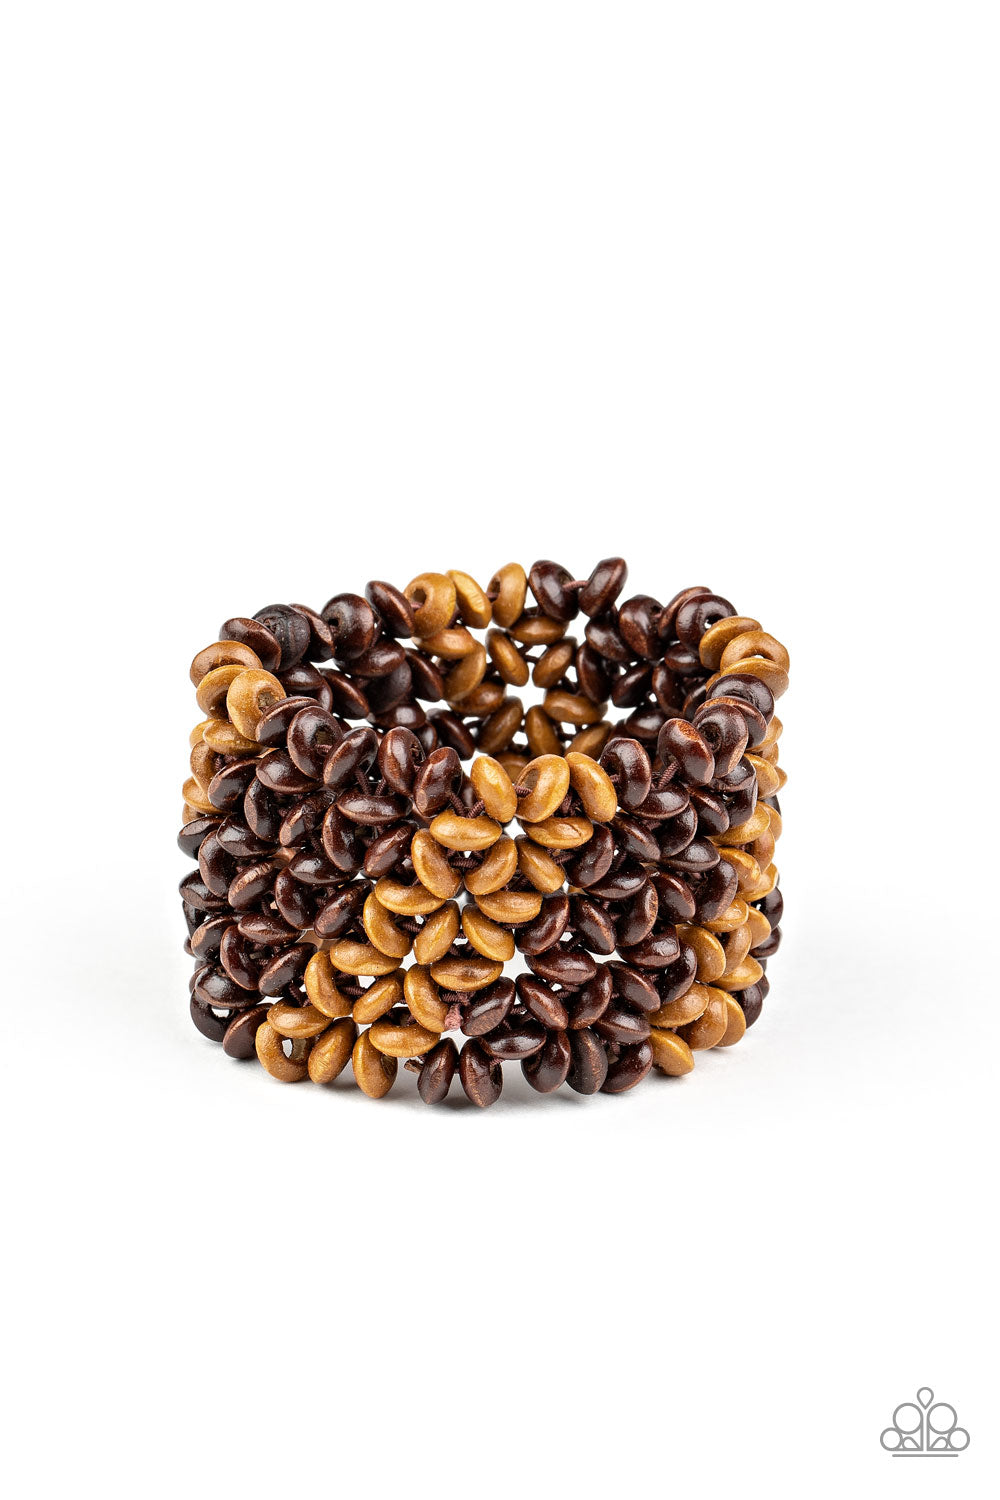 Paparazzi Island Expression - Brown Wooden Bracelet - A Finishing Touch 